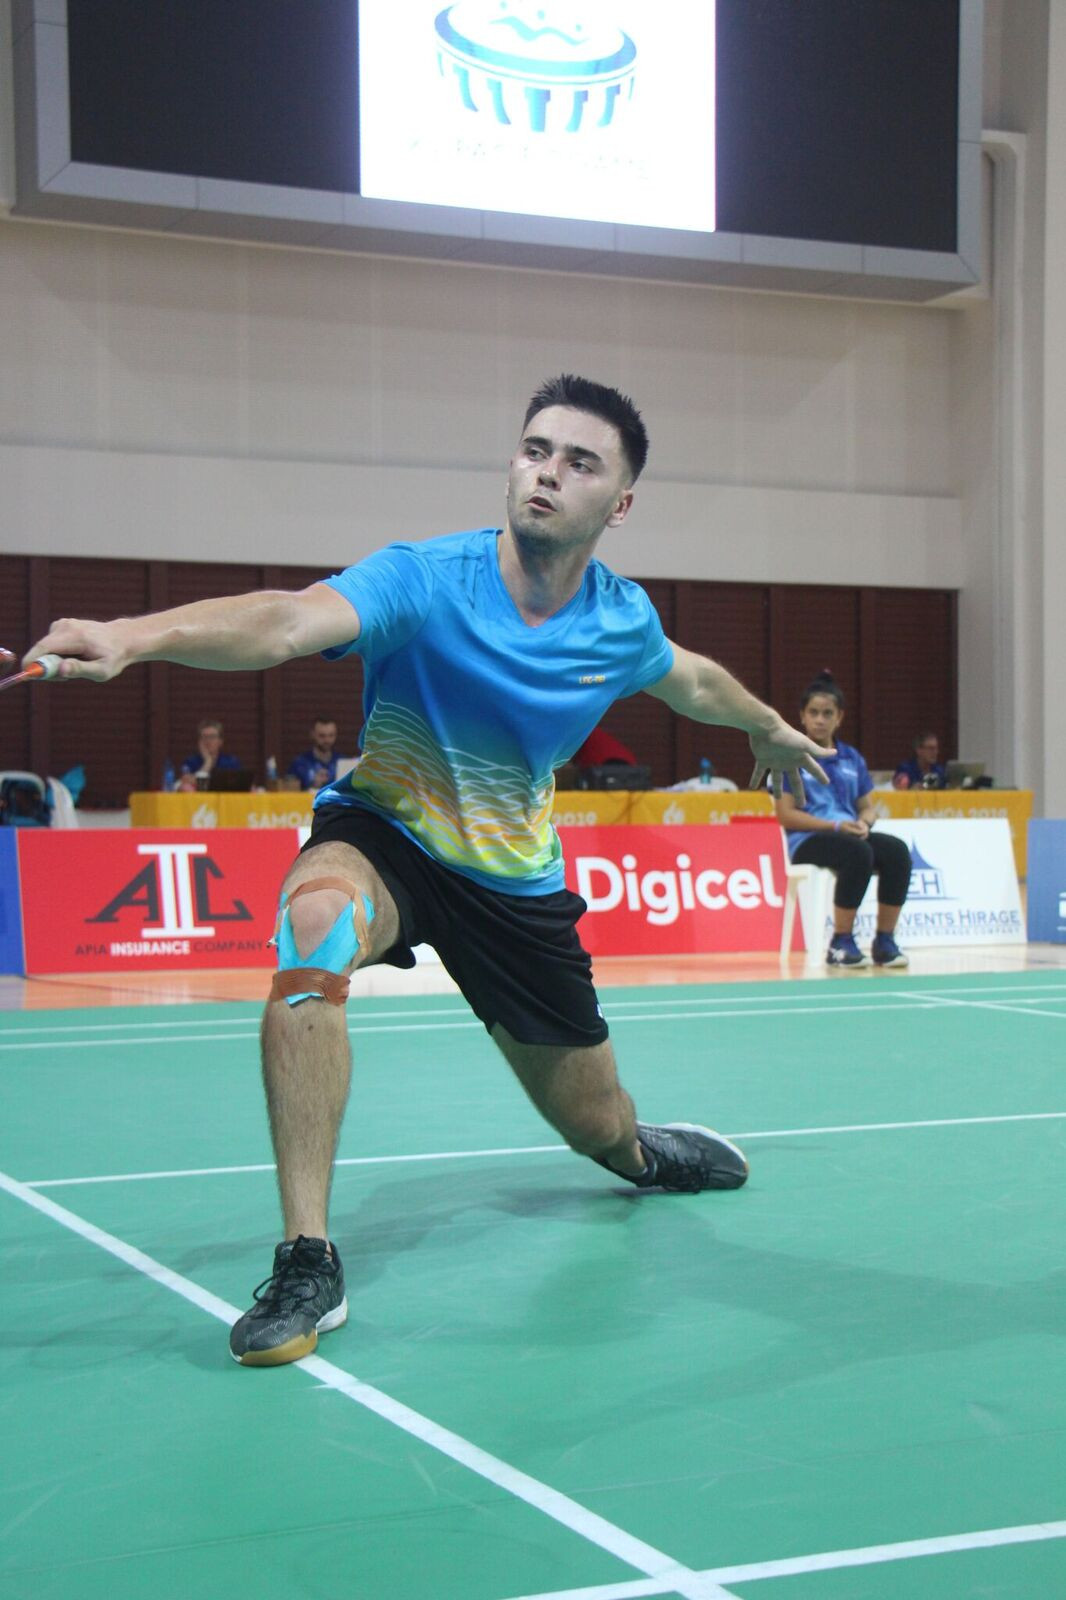 The men's and women's singles and doubles events were concluded at the Multi-Sport Centre ©Samoa 2019